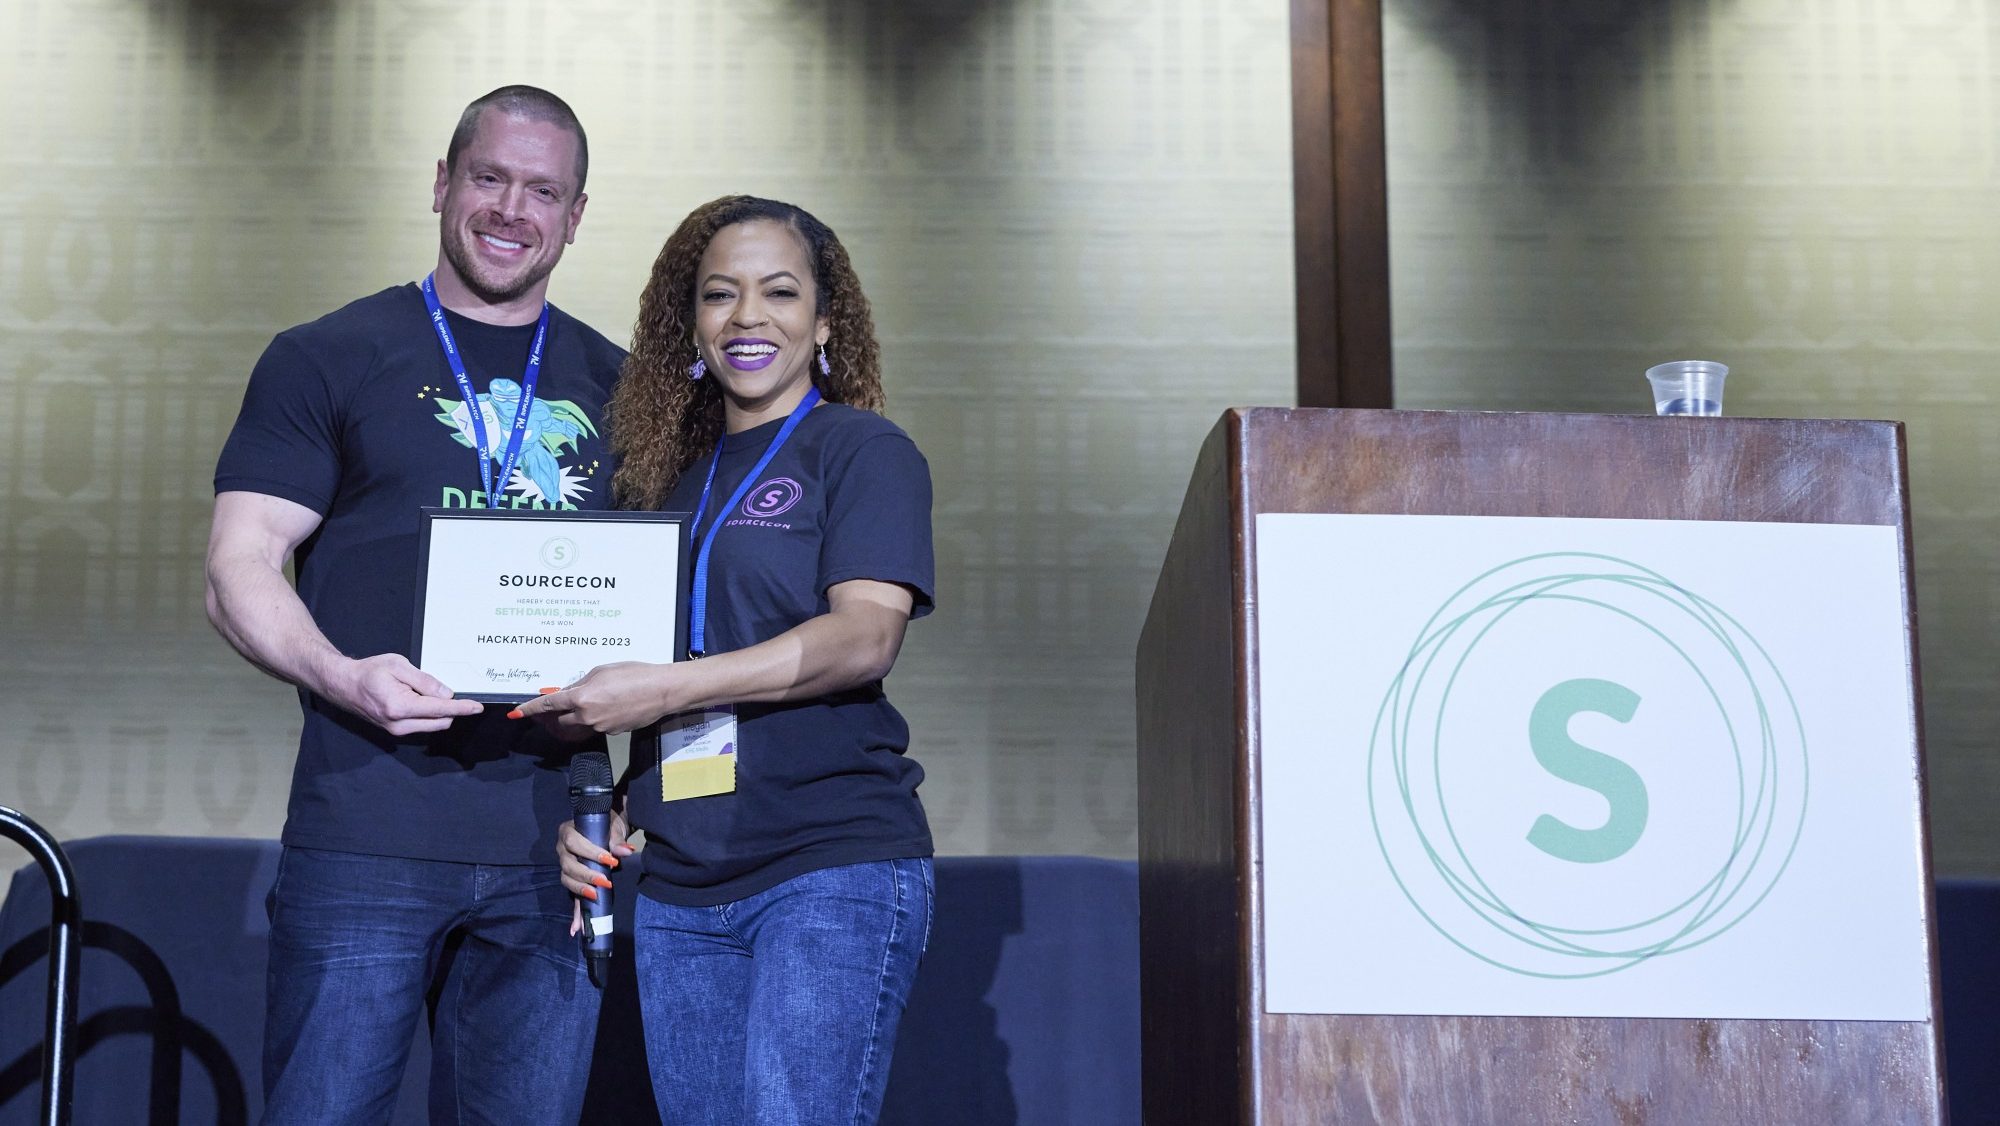 Everything You Need To Know To Win The #SourceCon Grand Master Challenge